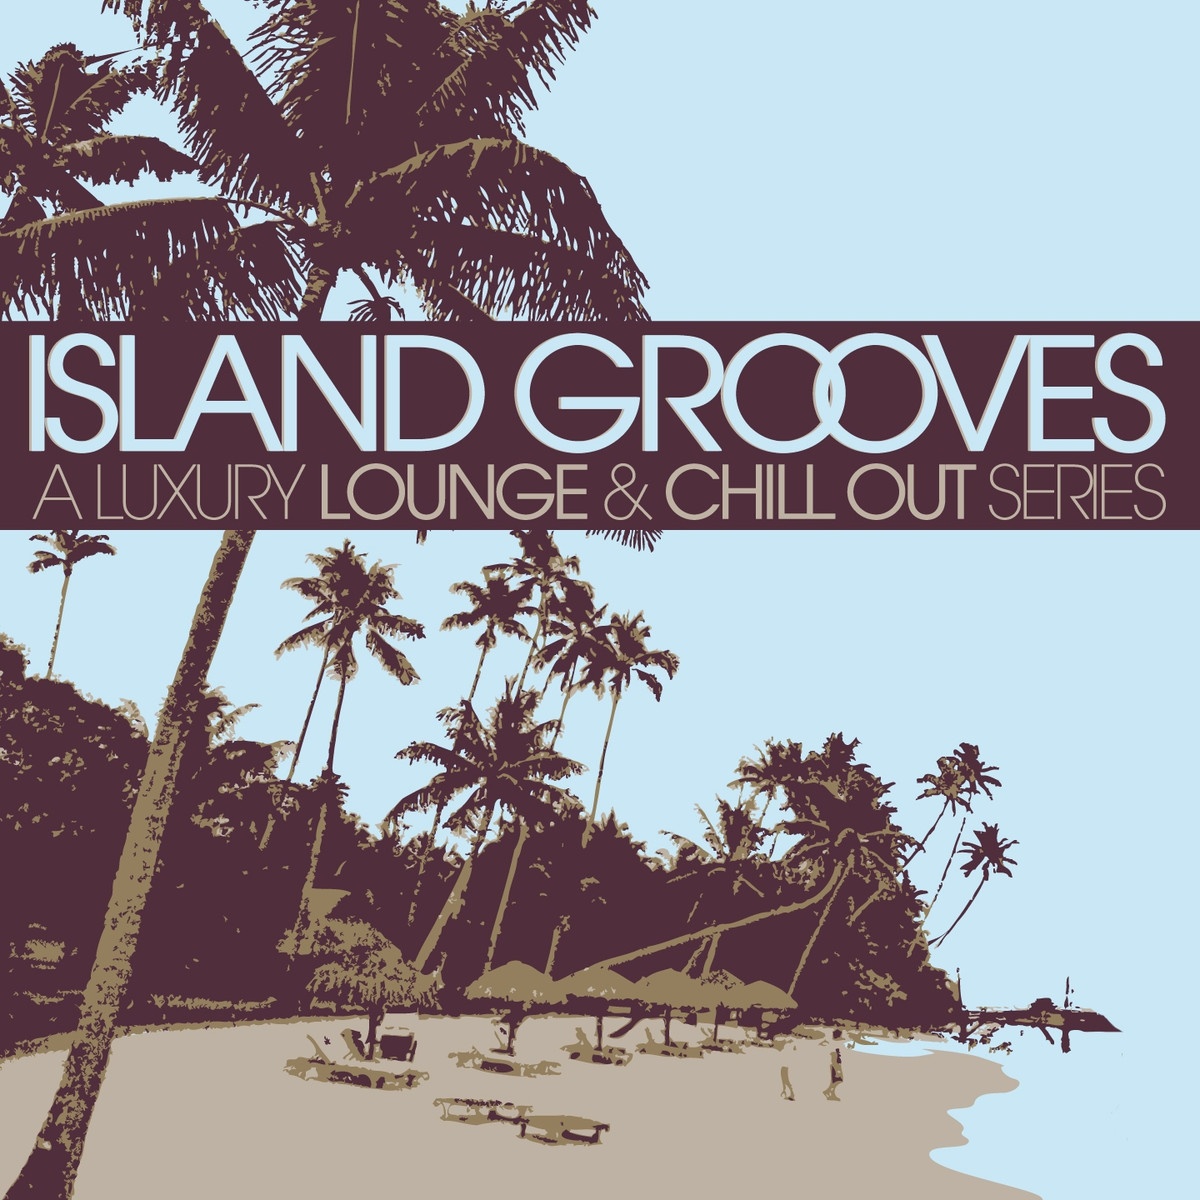 Island Grooves (A Luxury Lounge & Chill Out Series)